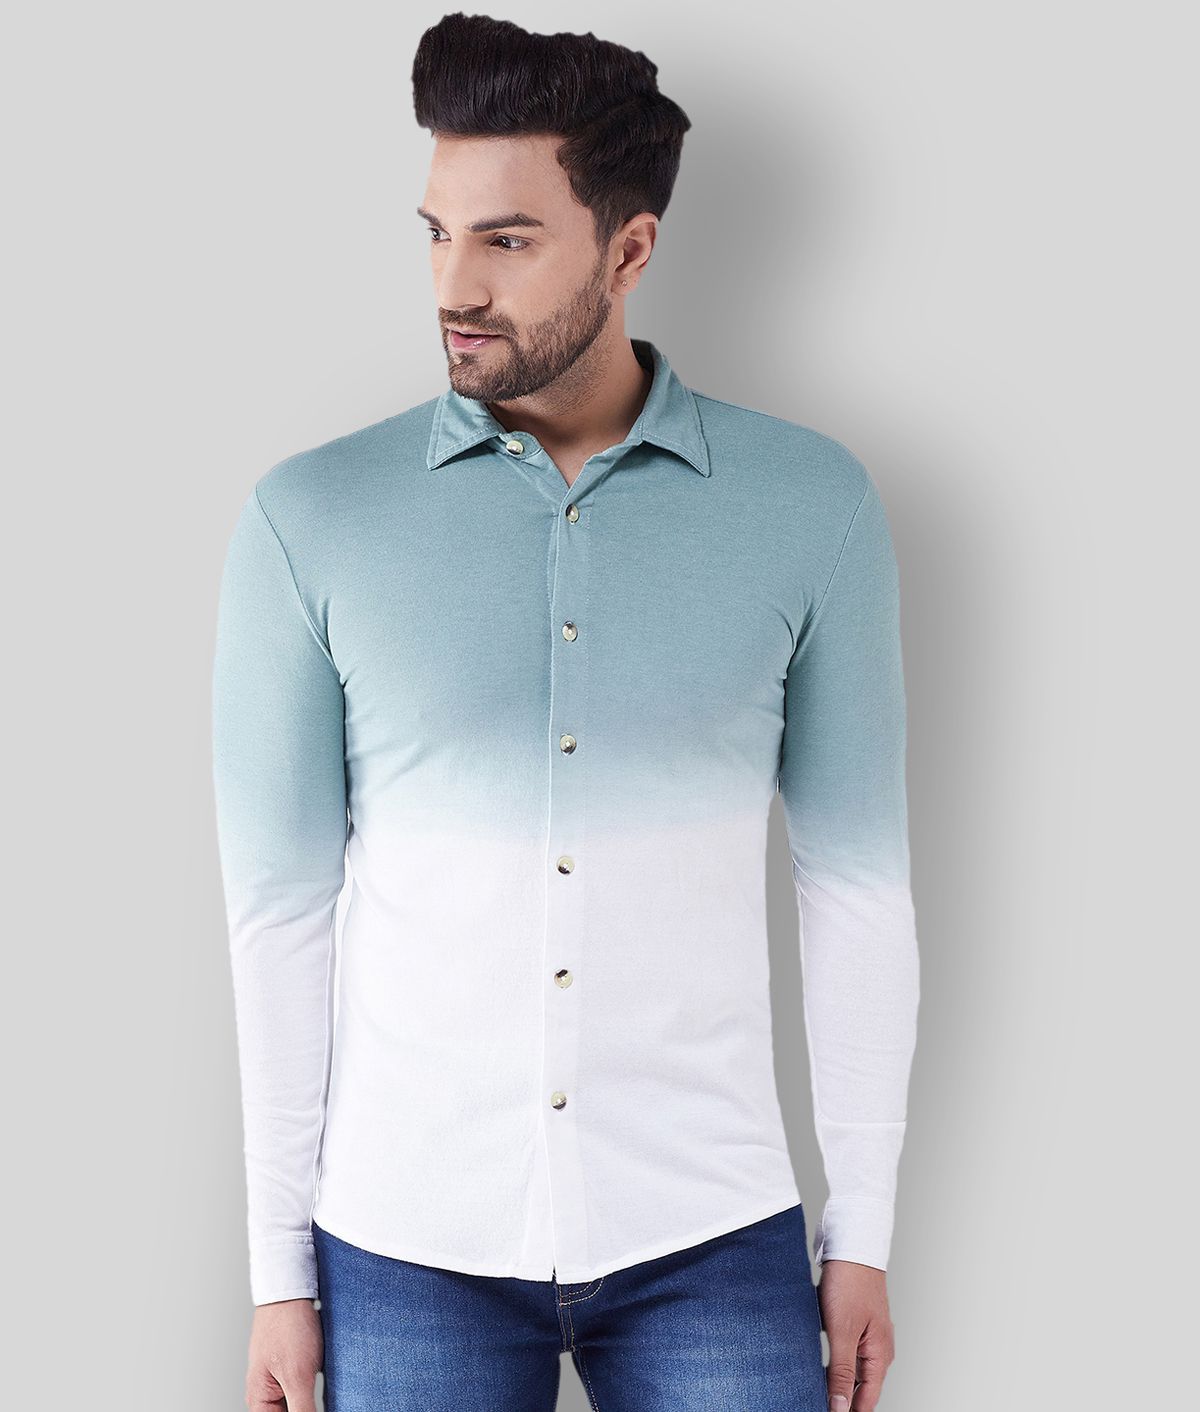 Gritstones - Multicolor Cotton Regular Fit Men's Casual Shirt (Pack of 1 )